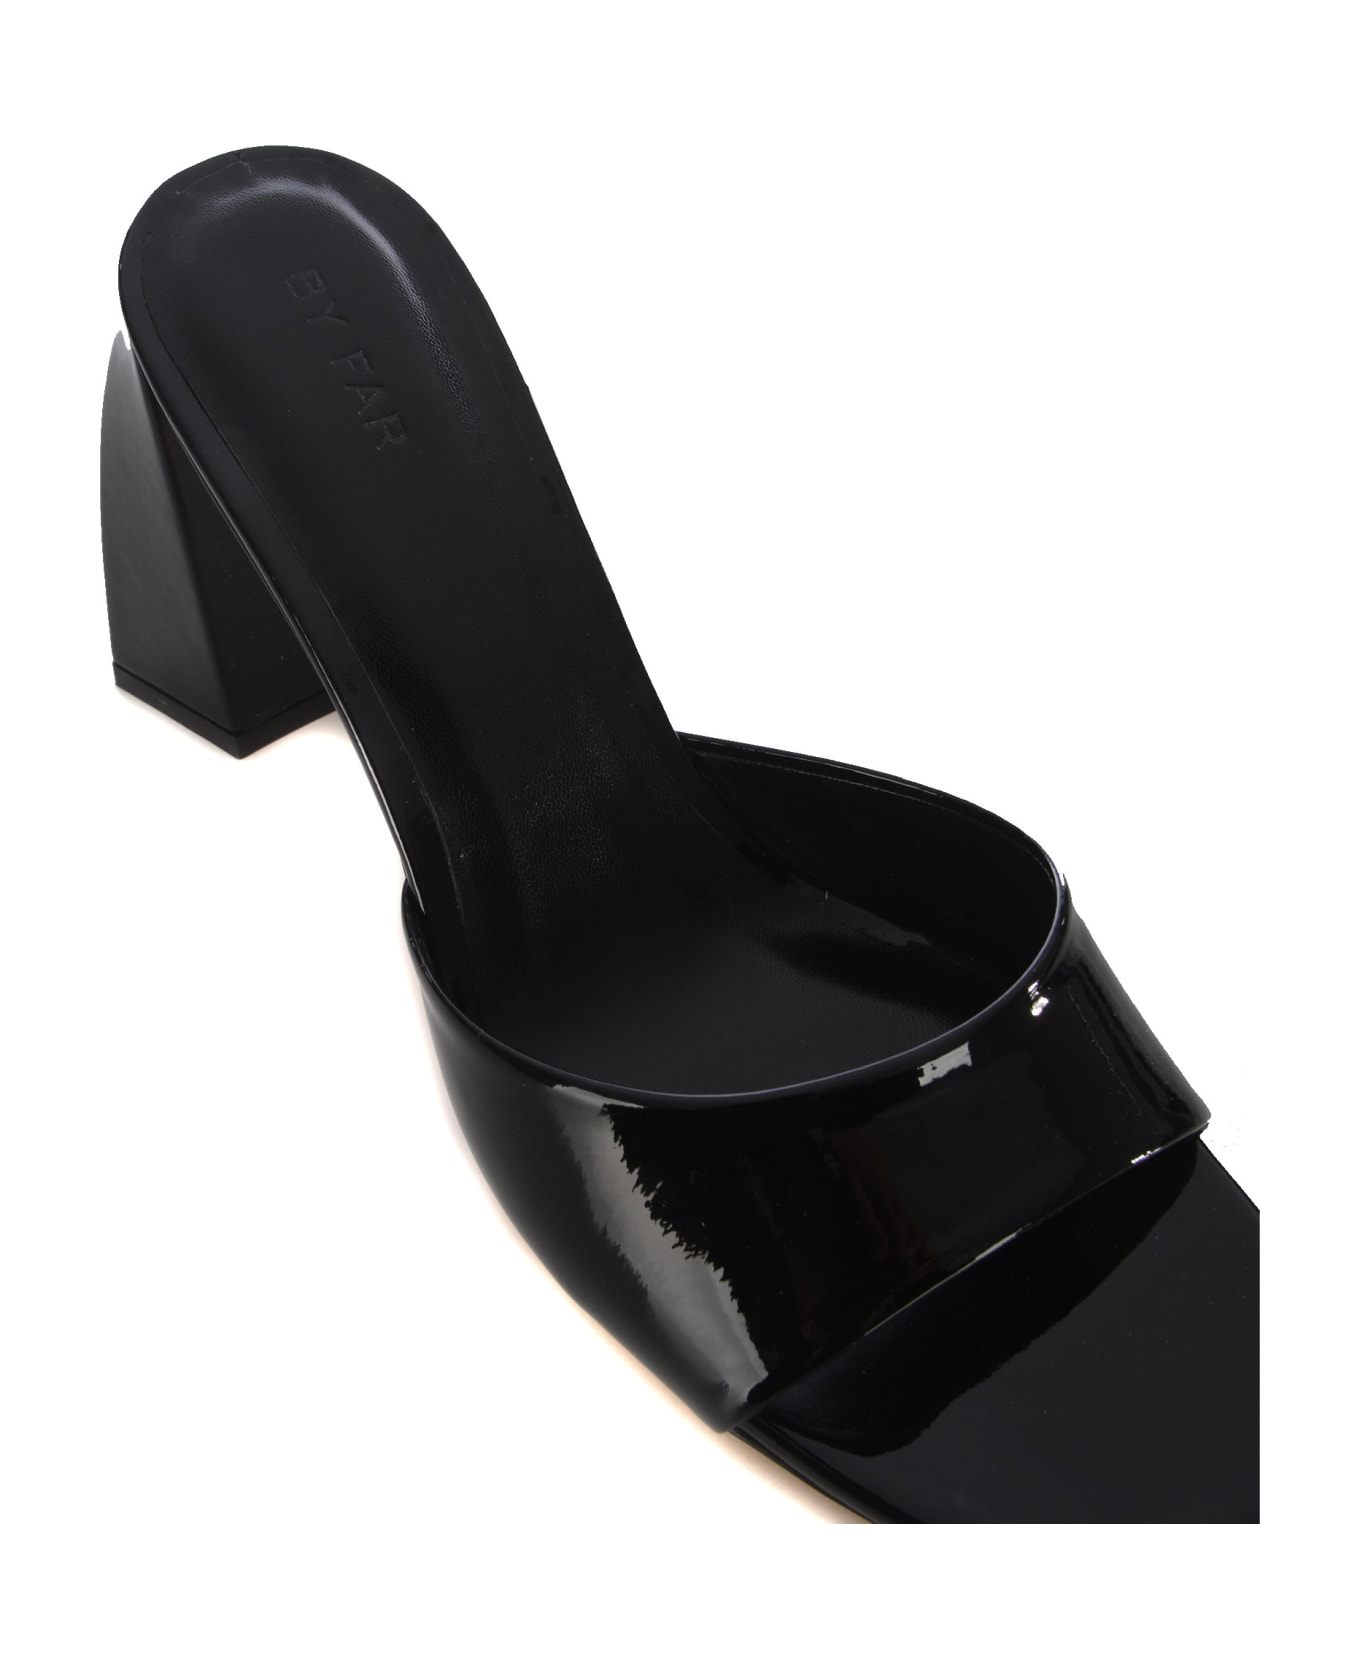 BY FAR Sandal By Far "michele" In Semi-gloss Leather Available Store Pompei - Nero